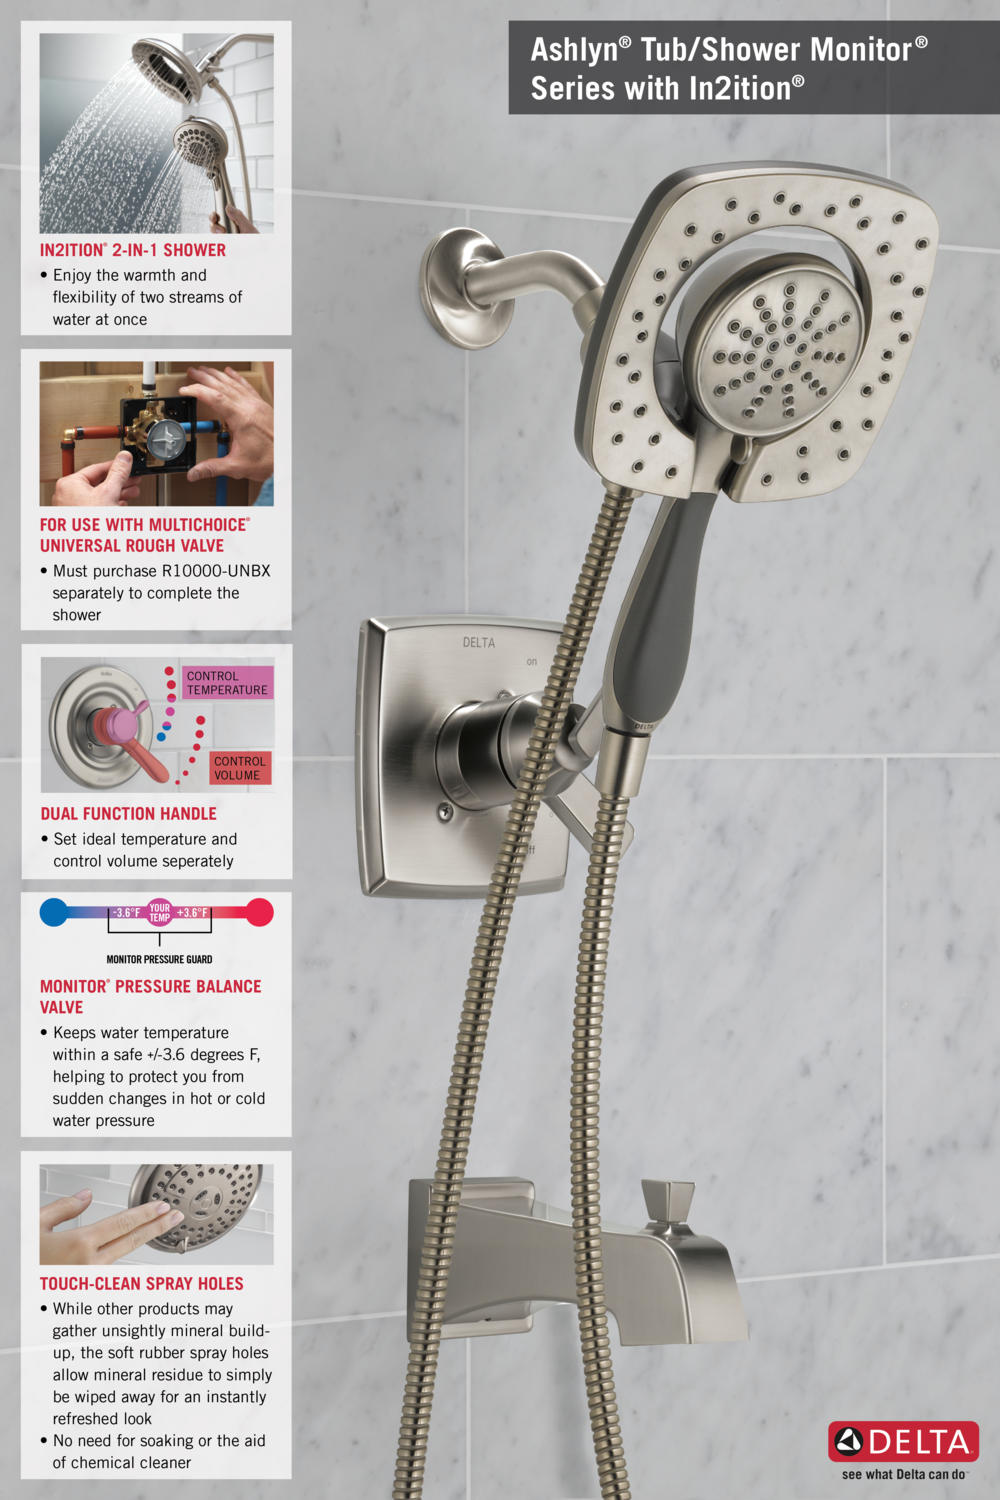 Home Depot Faucet T17464-SS-I T17 In2ition Shower Infographic